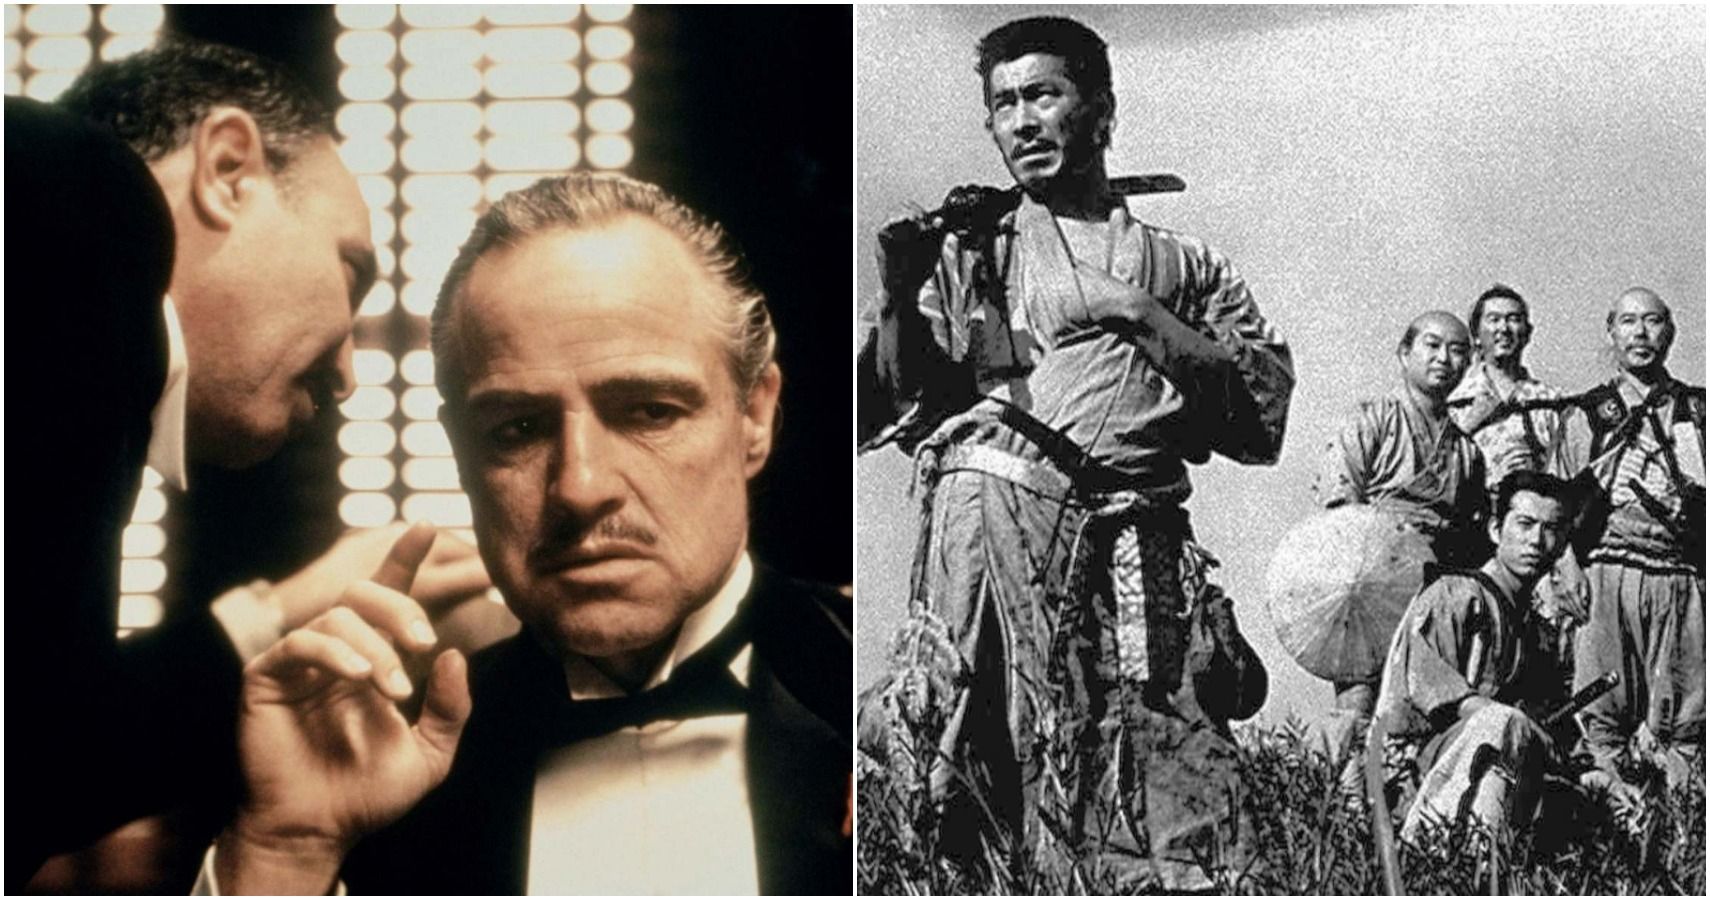 The Godfather and Seven Samurai, two of Letterboxd users' favorite films